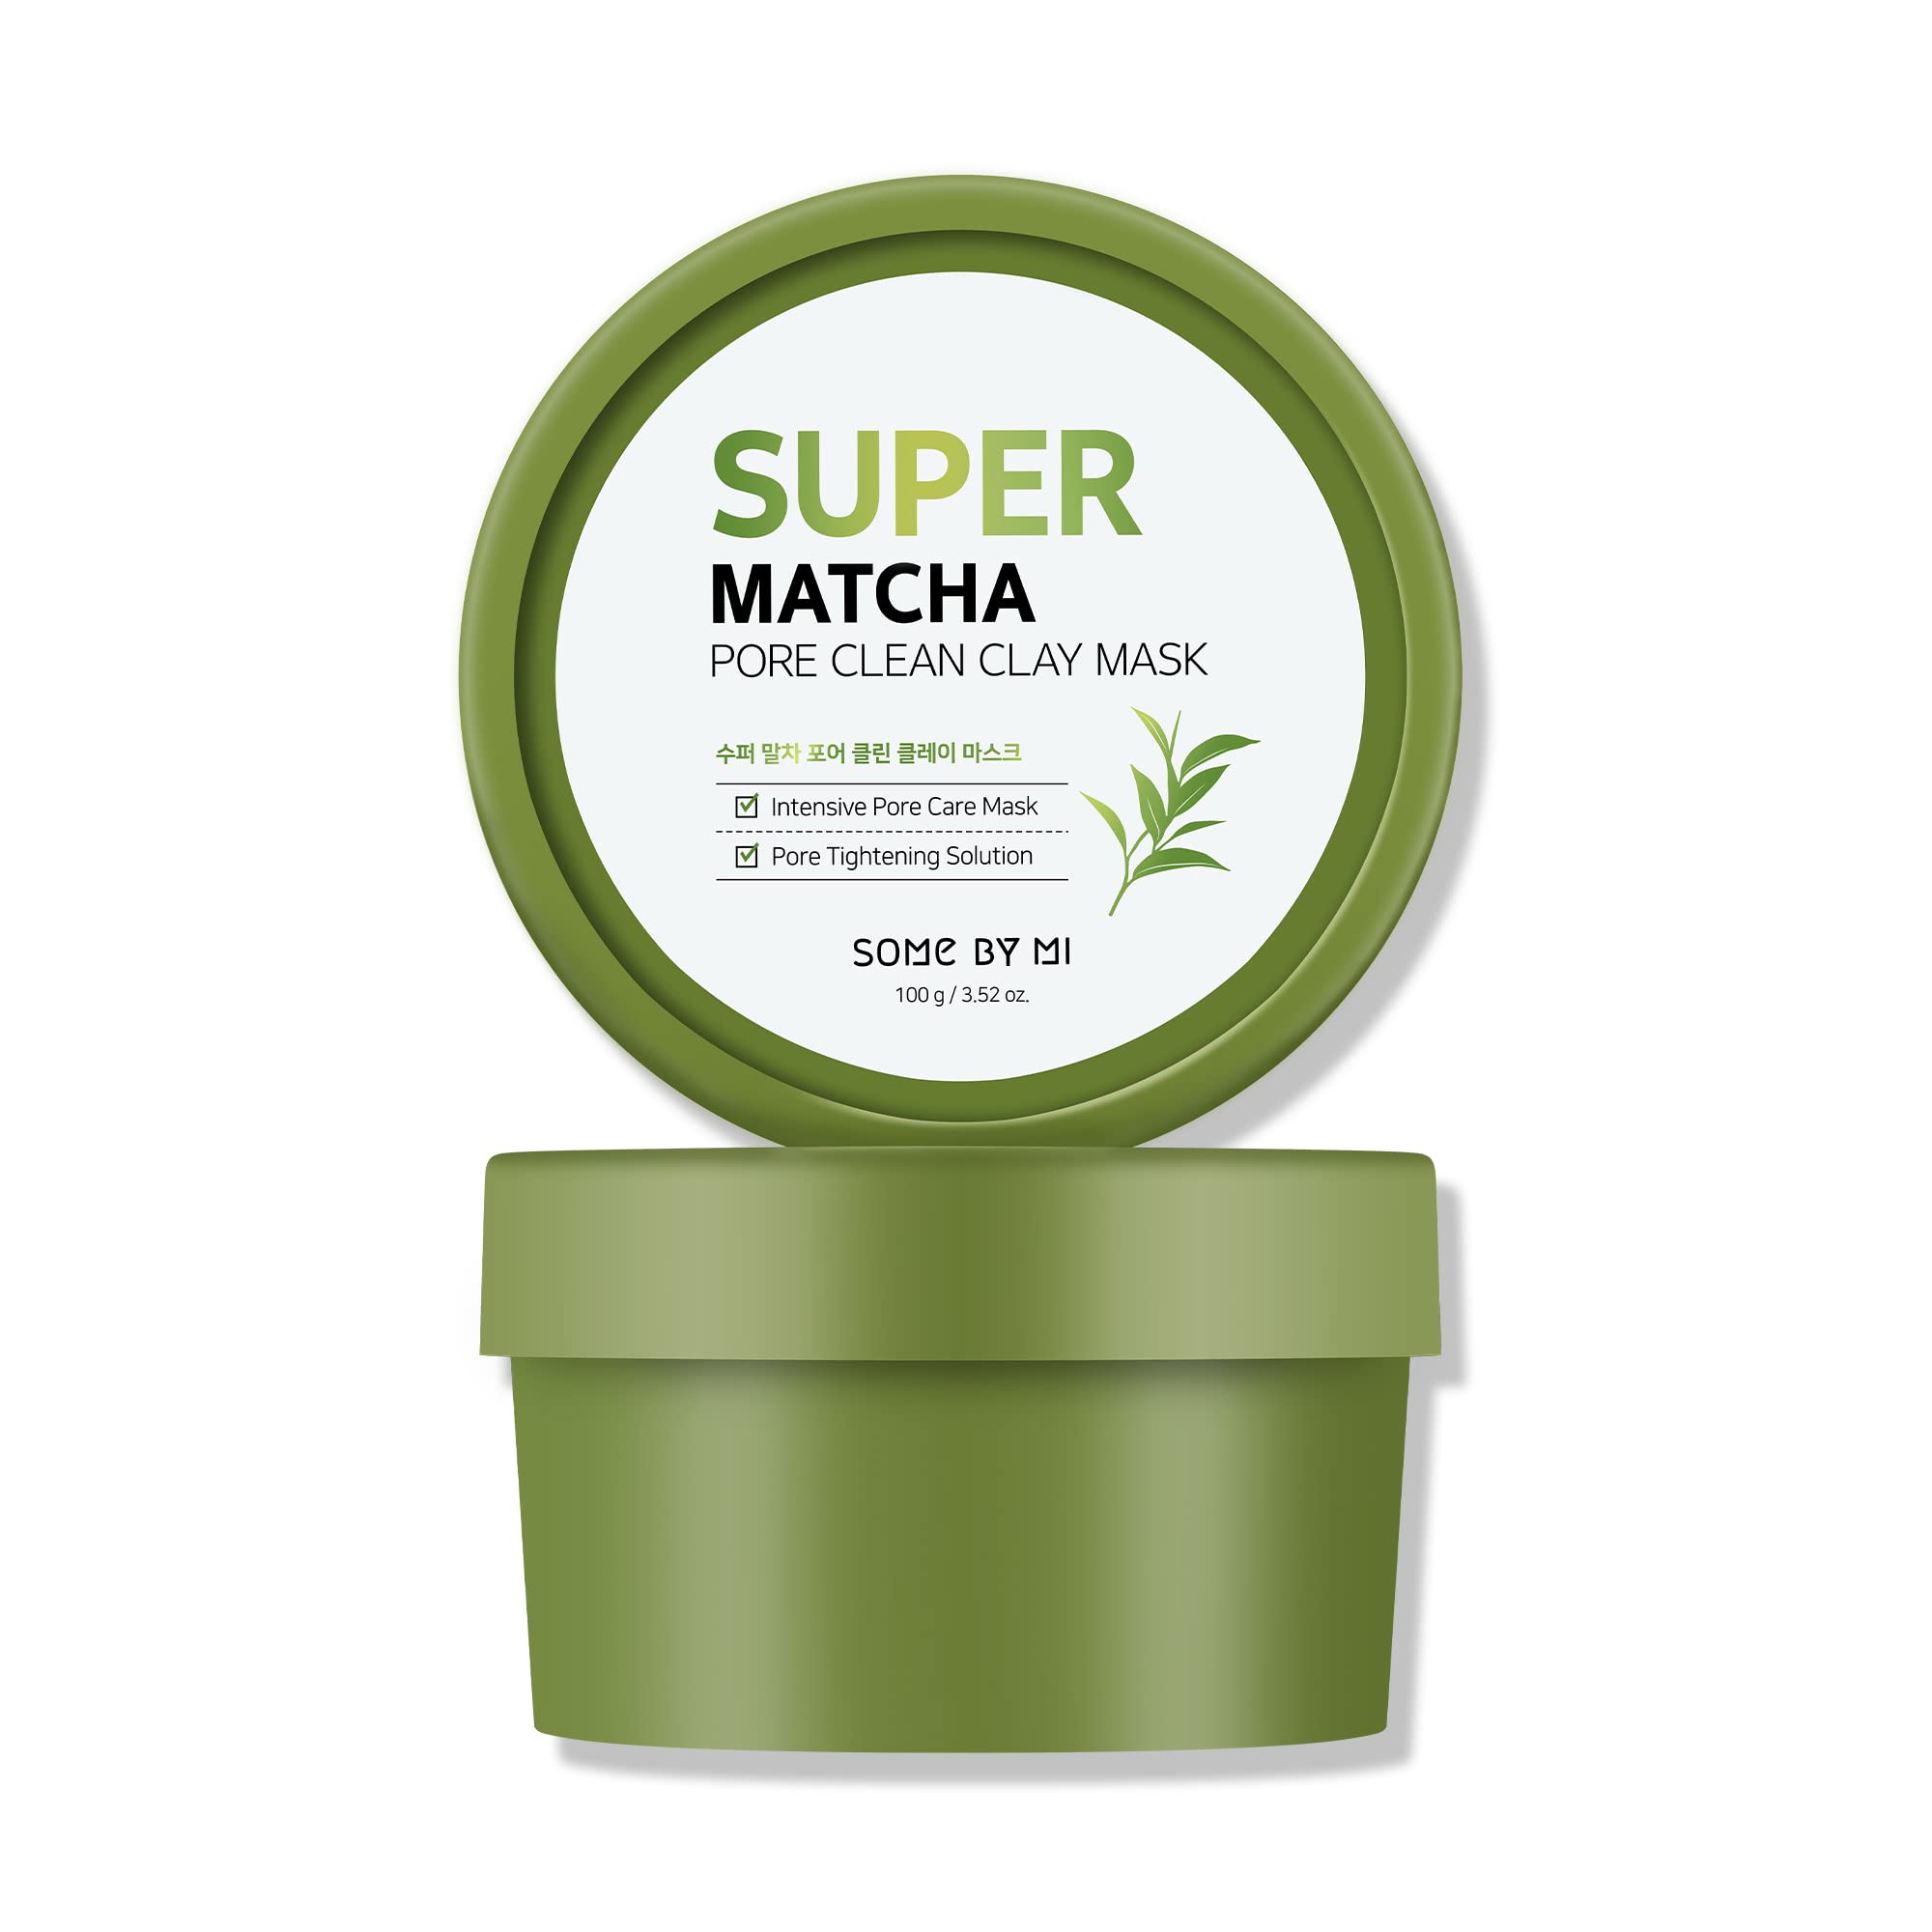 SOME BY MI - Super Matcha Pore Clean Clay Mask